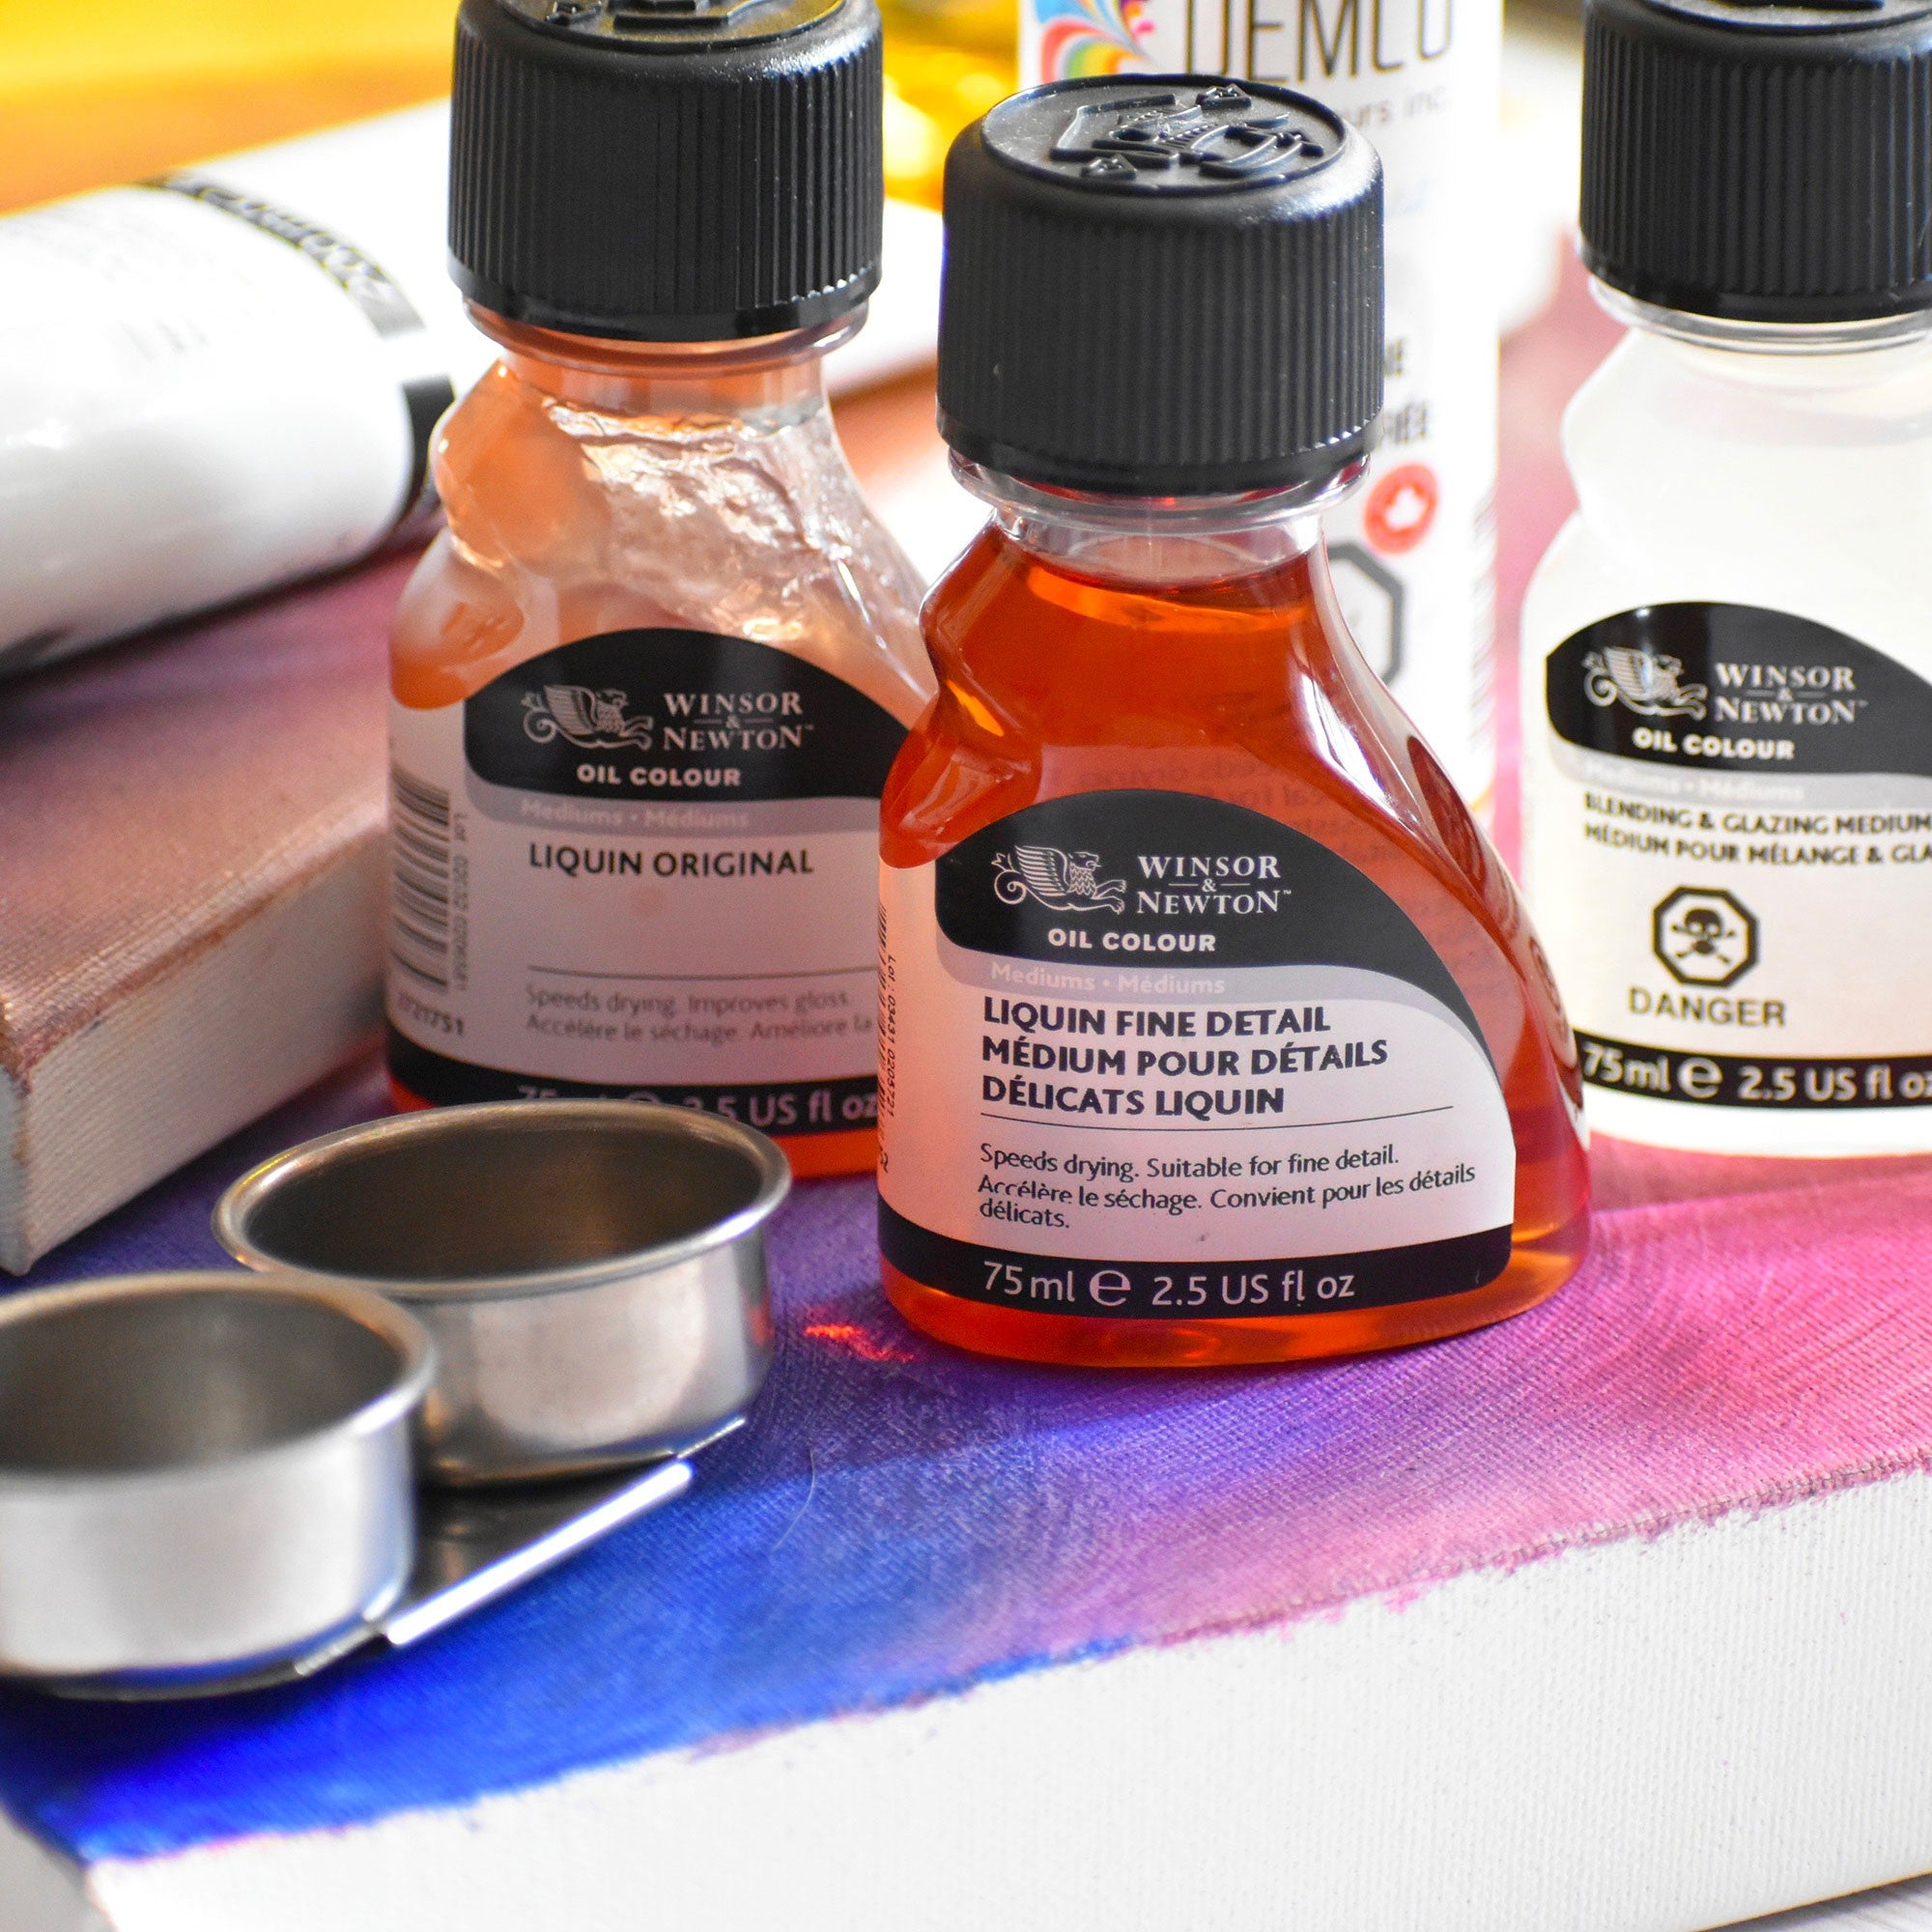 What is Liquin used for in oil painting?